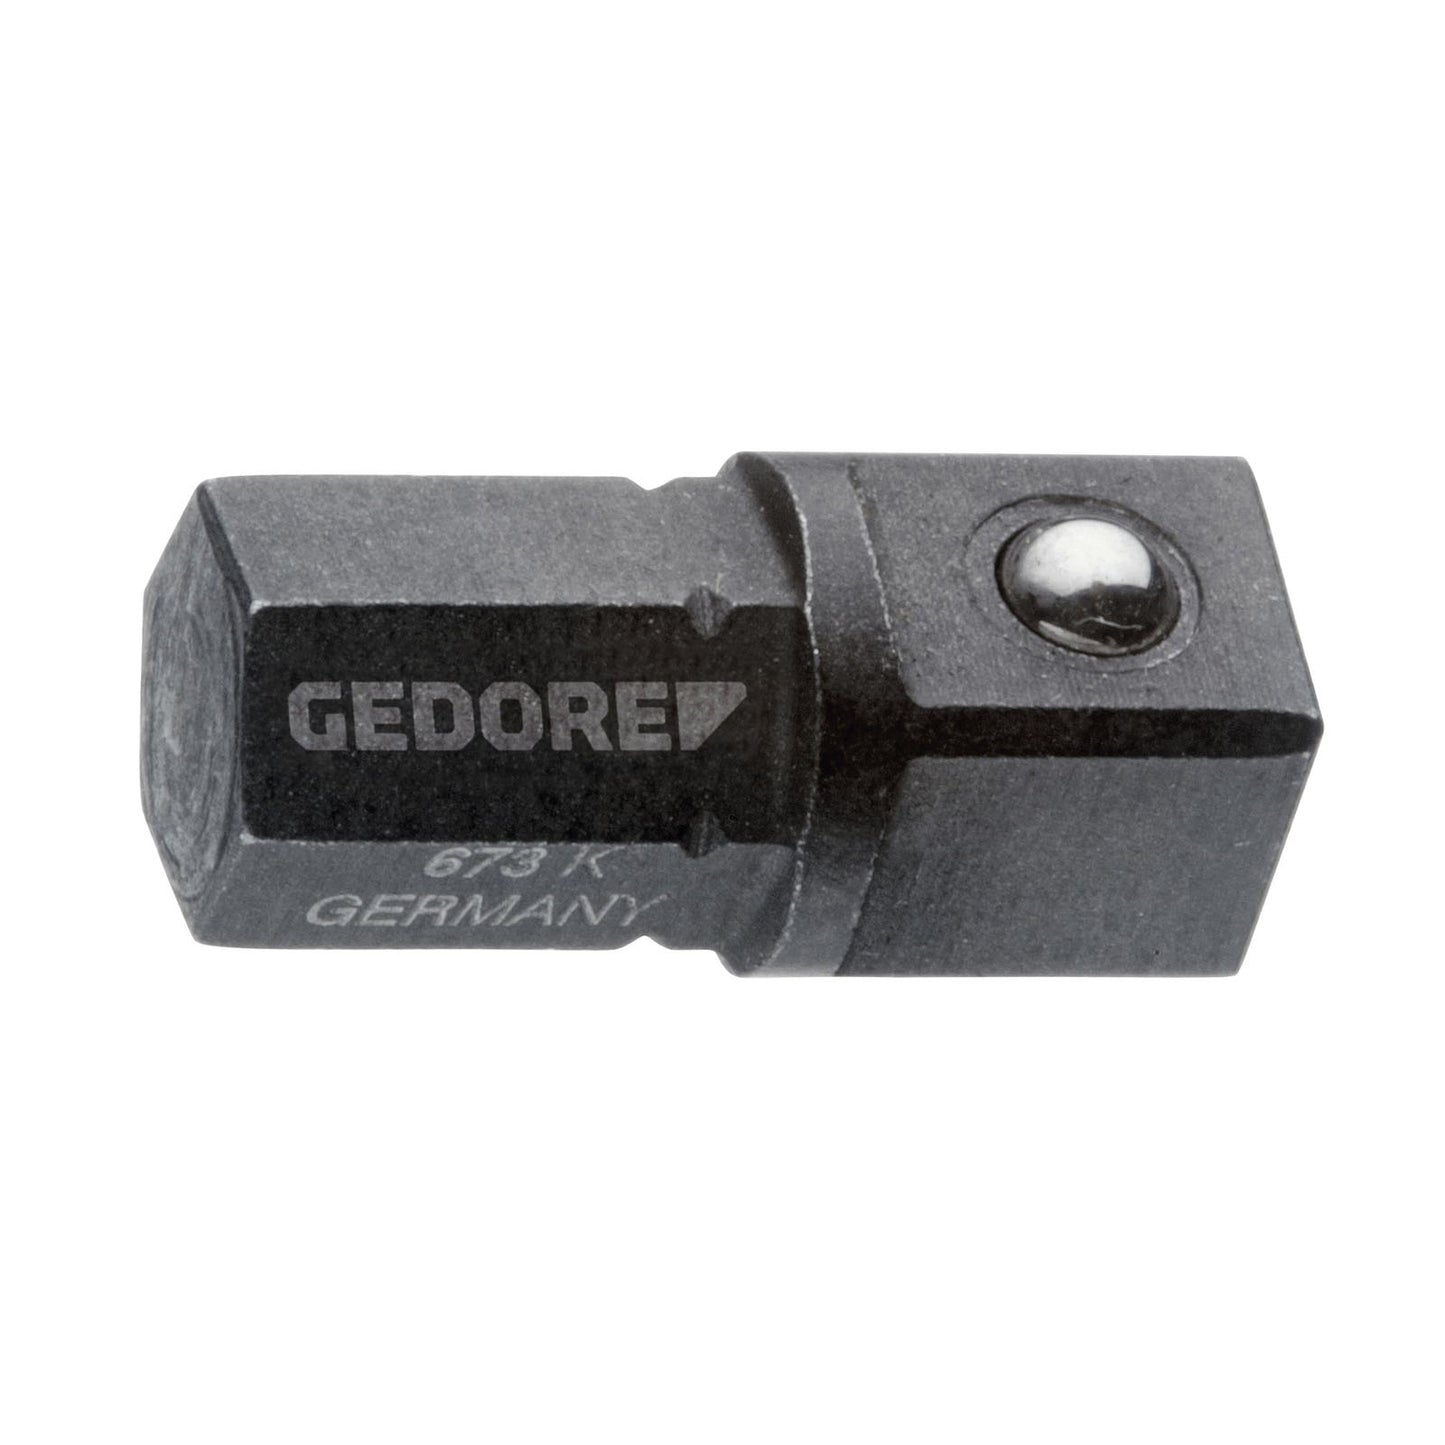 GEDORE 673 K - Hex 1/4" x Square 1/4" Adapter (2000245)